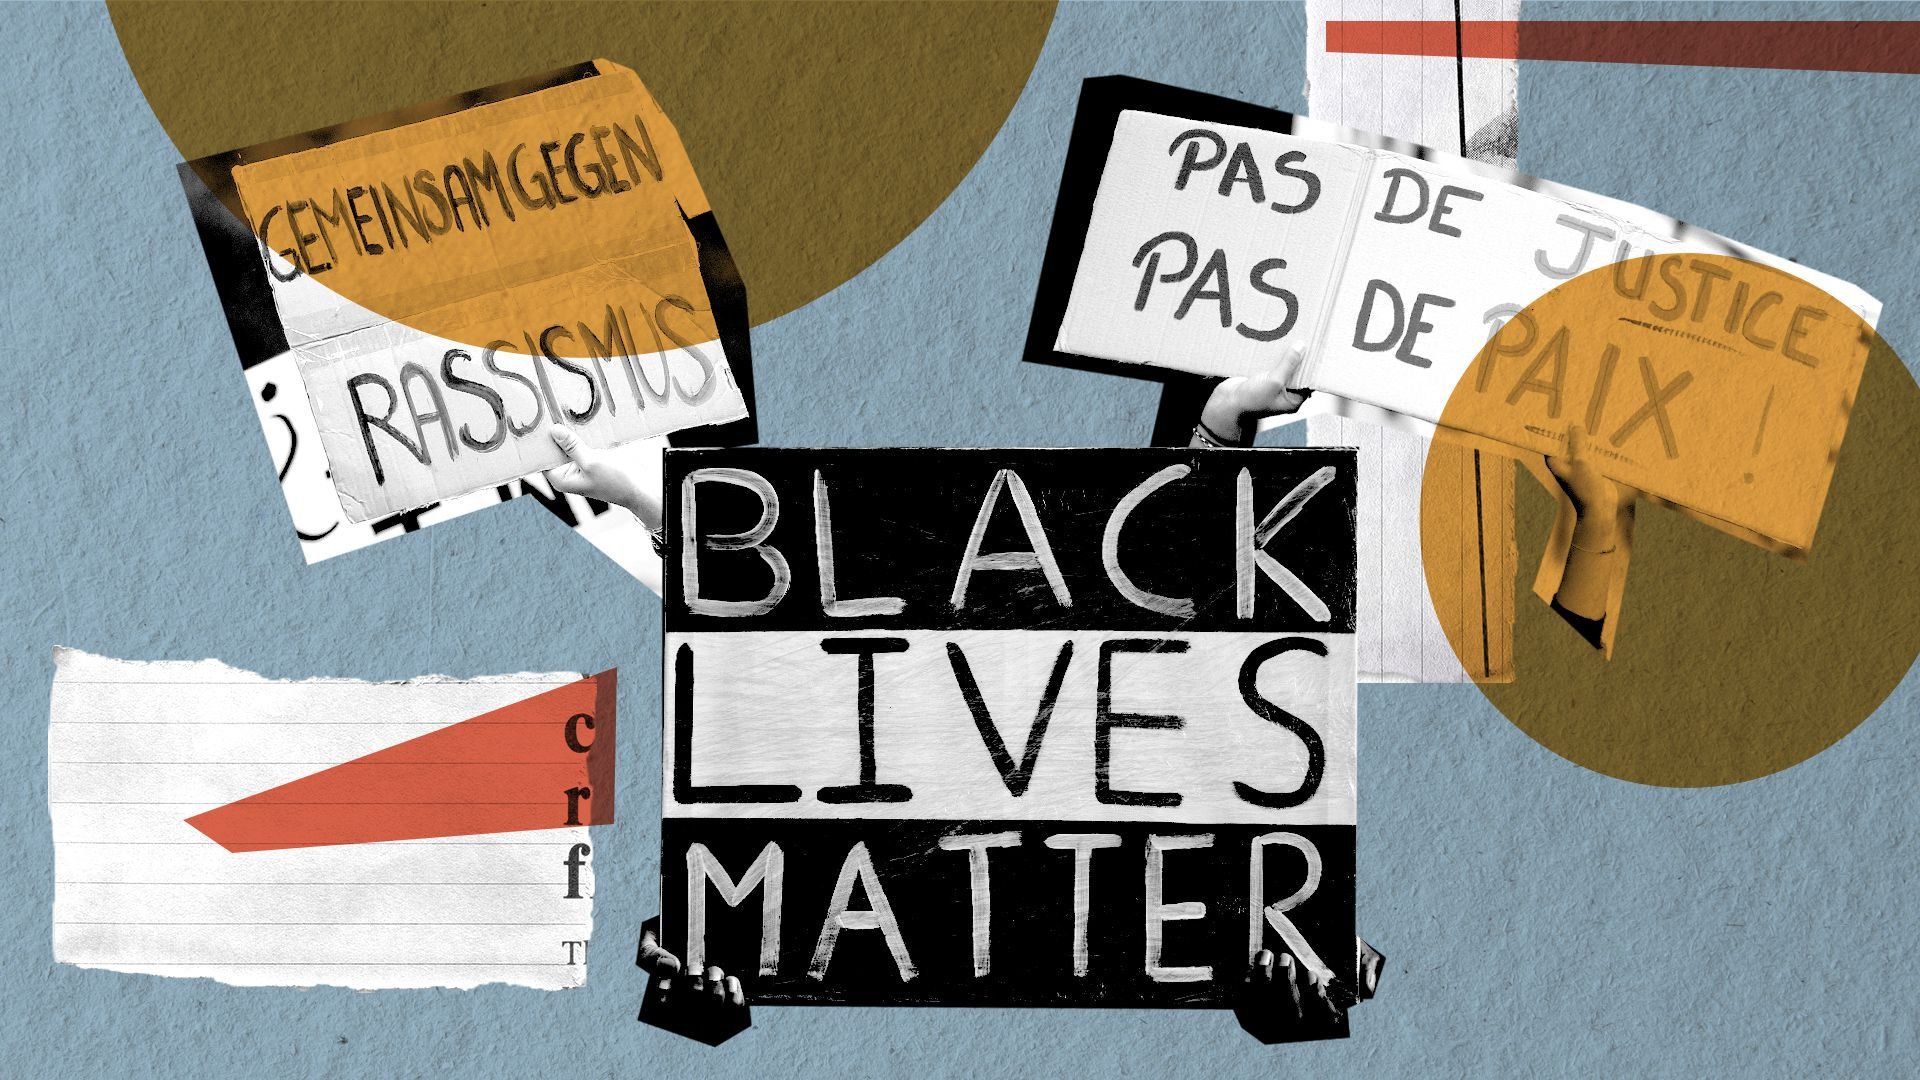 The global impact of Black Lives Matter